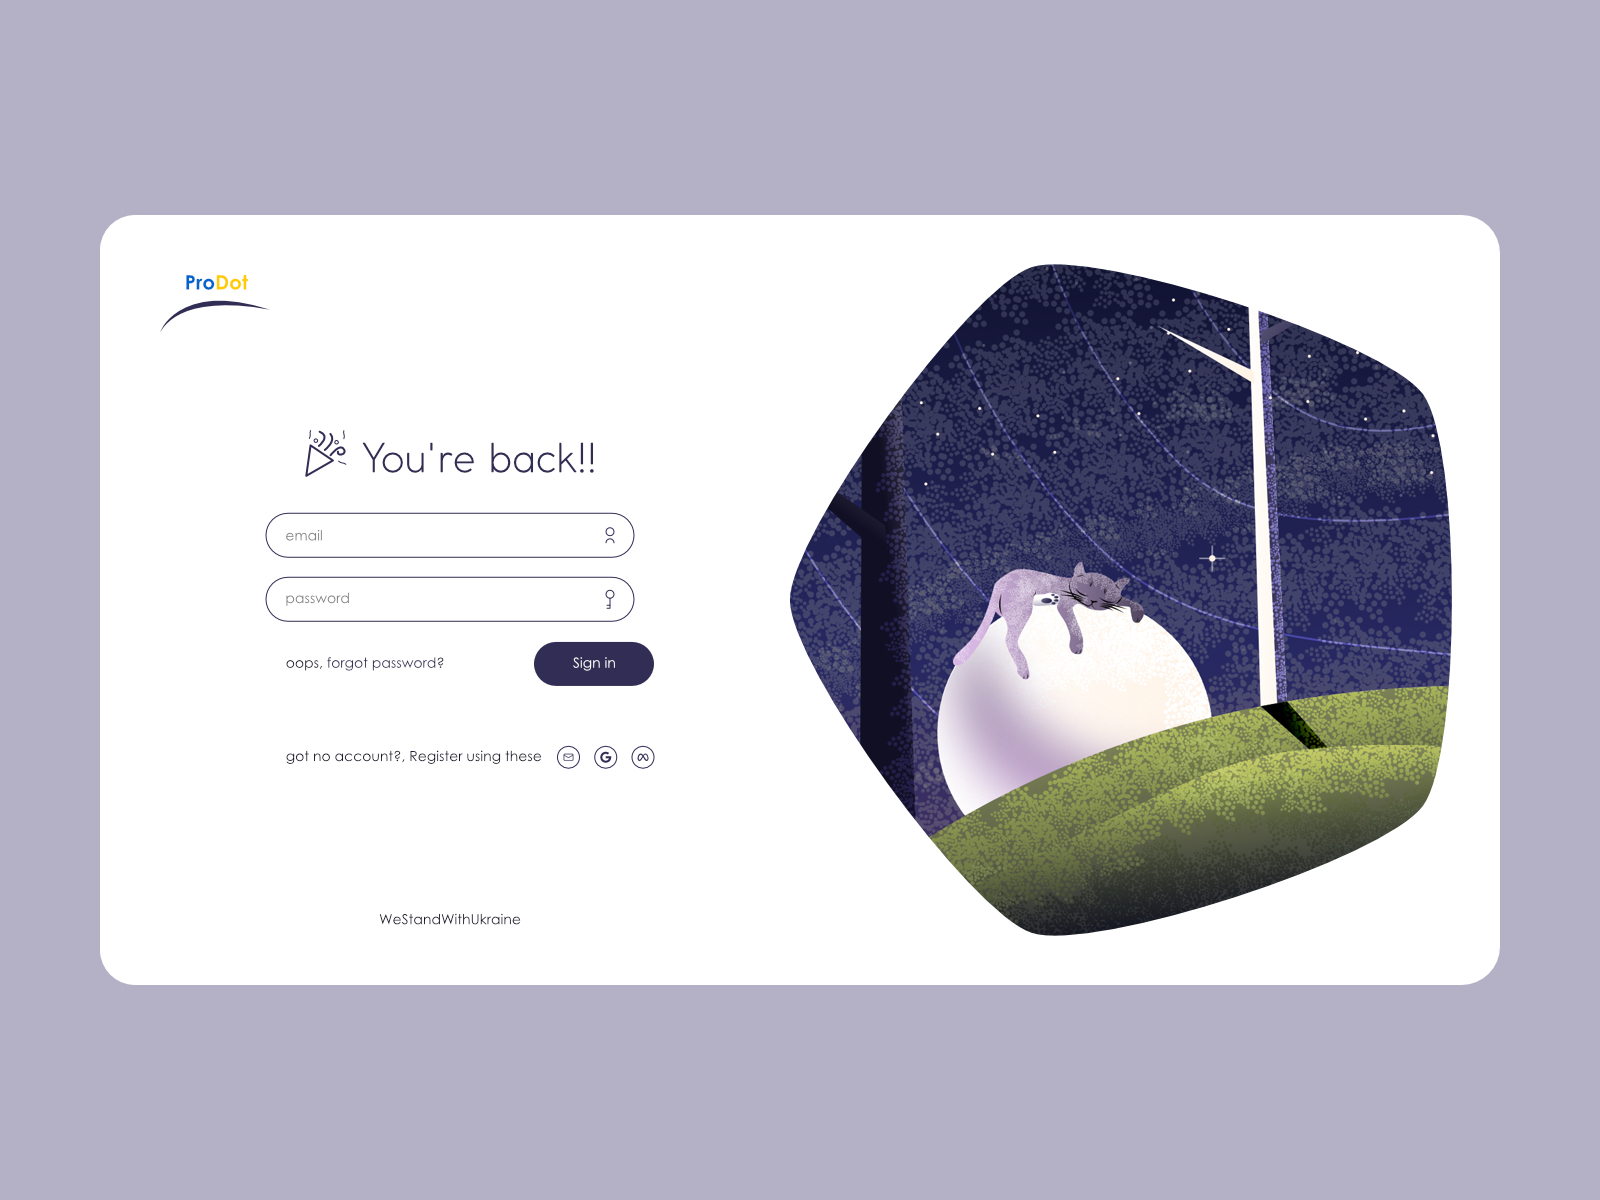 Login page ️ 2d cat clean copy copywriting doodle grainy illustration login moon night sky noise signin signup texture ui form ux writing vector webdesign welcome